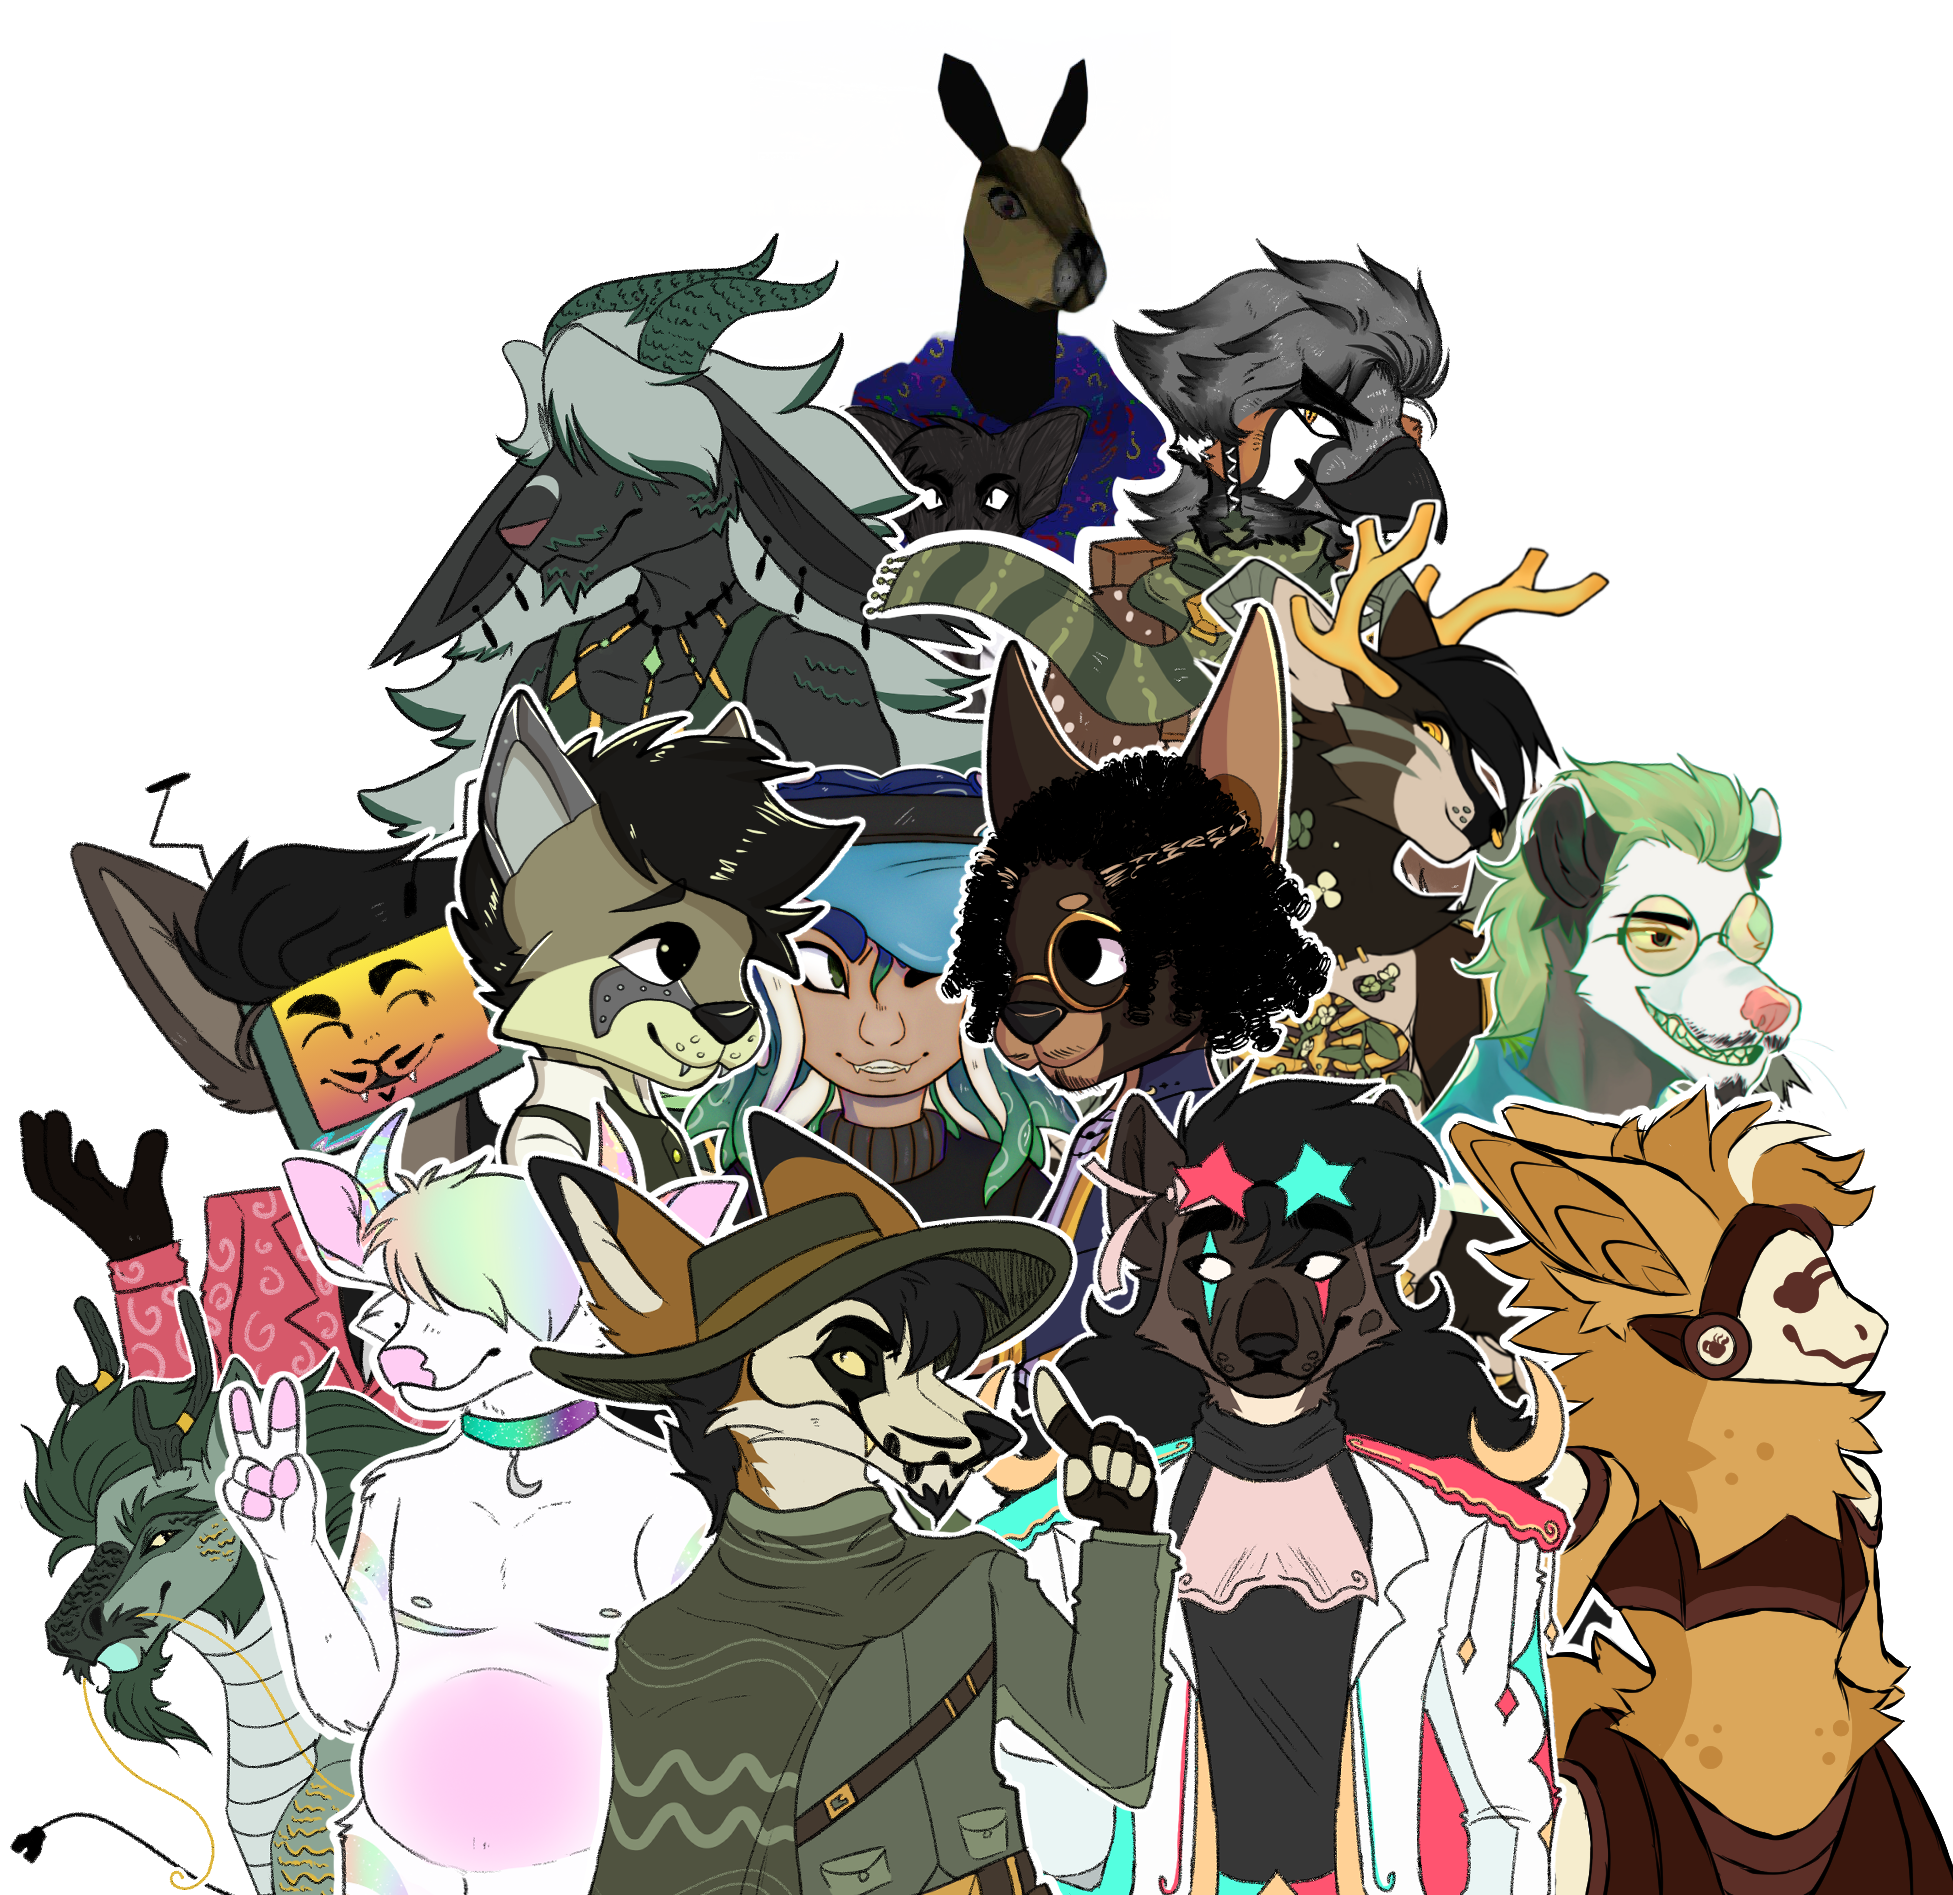 A collage of 8 different halfbody drawings featuring a maned wolf in a widebrimmed hat, a white and rainbow highland cow, a natural colored canine with wings, a natural colored steampunk themed coyote, a octoling with green and blue tenticale hair, a tv head with cat like features, a kanagroo in a button up, and an anthro zebra finch